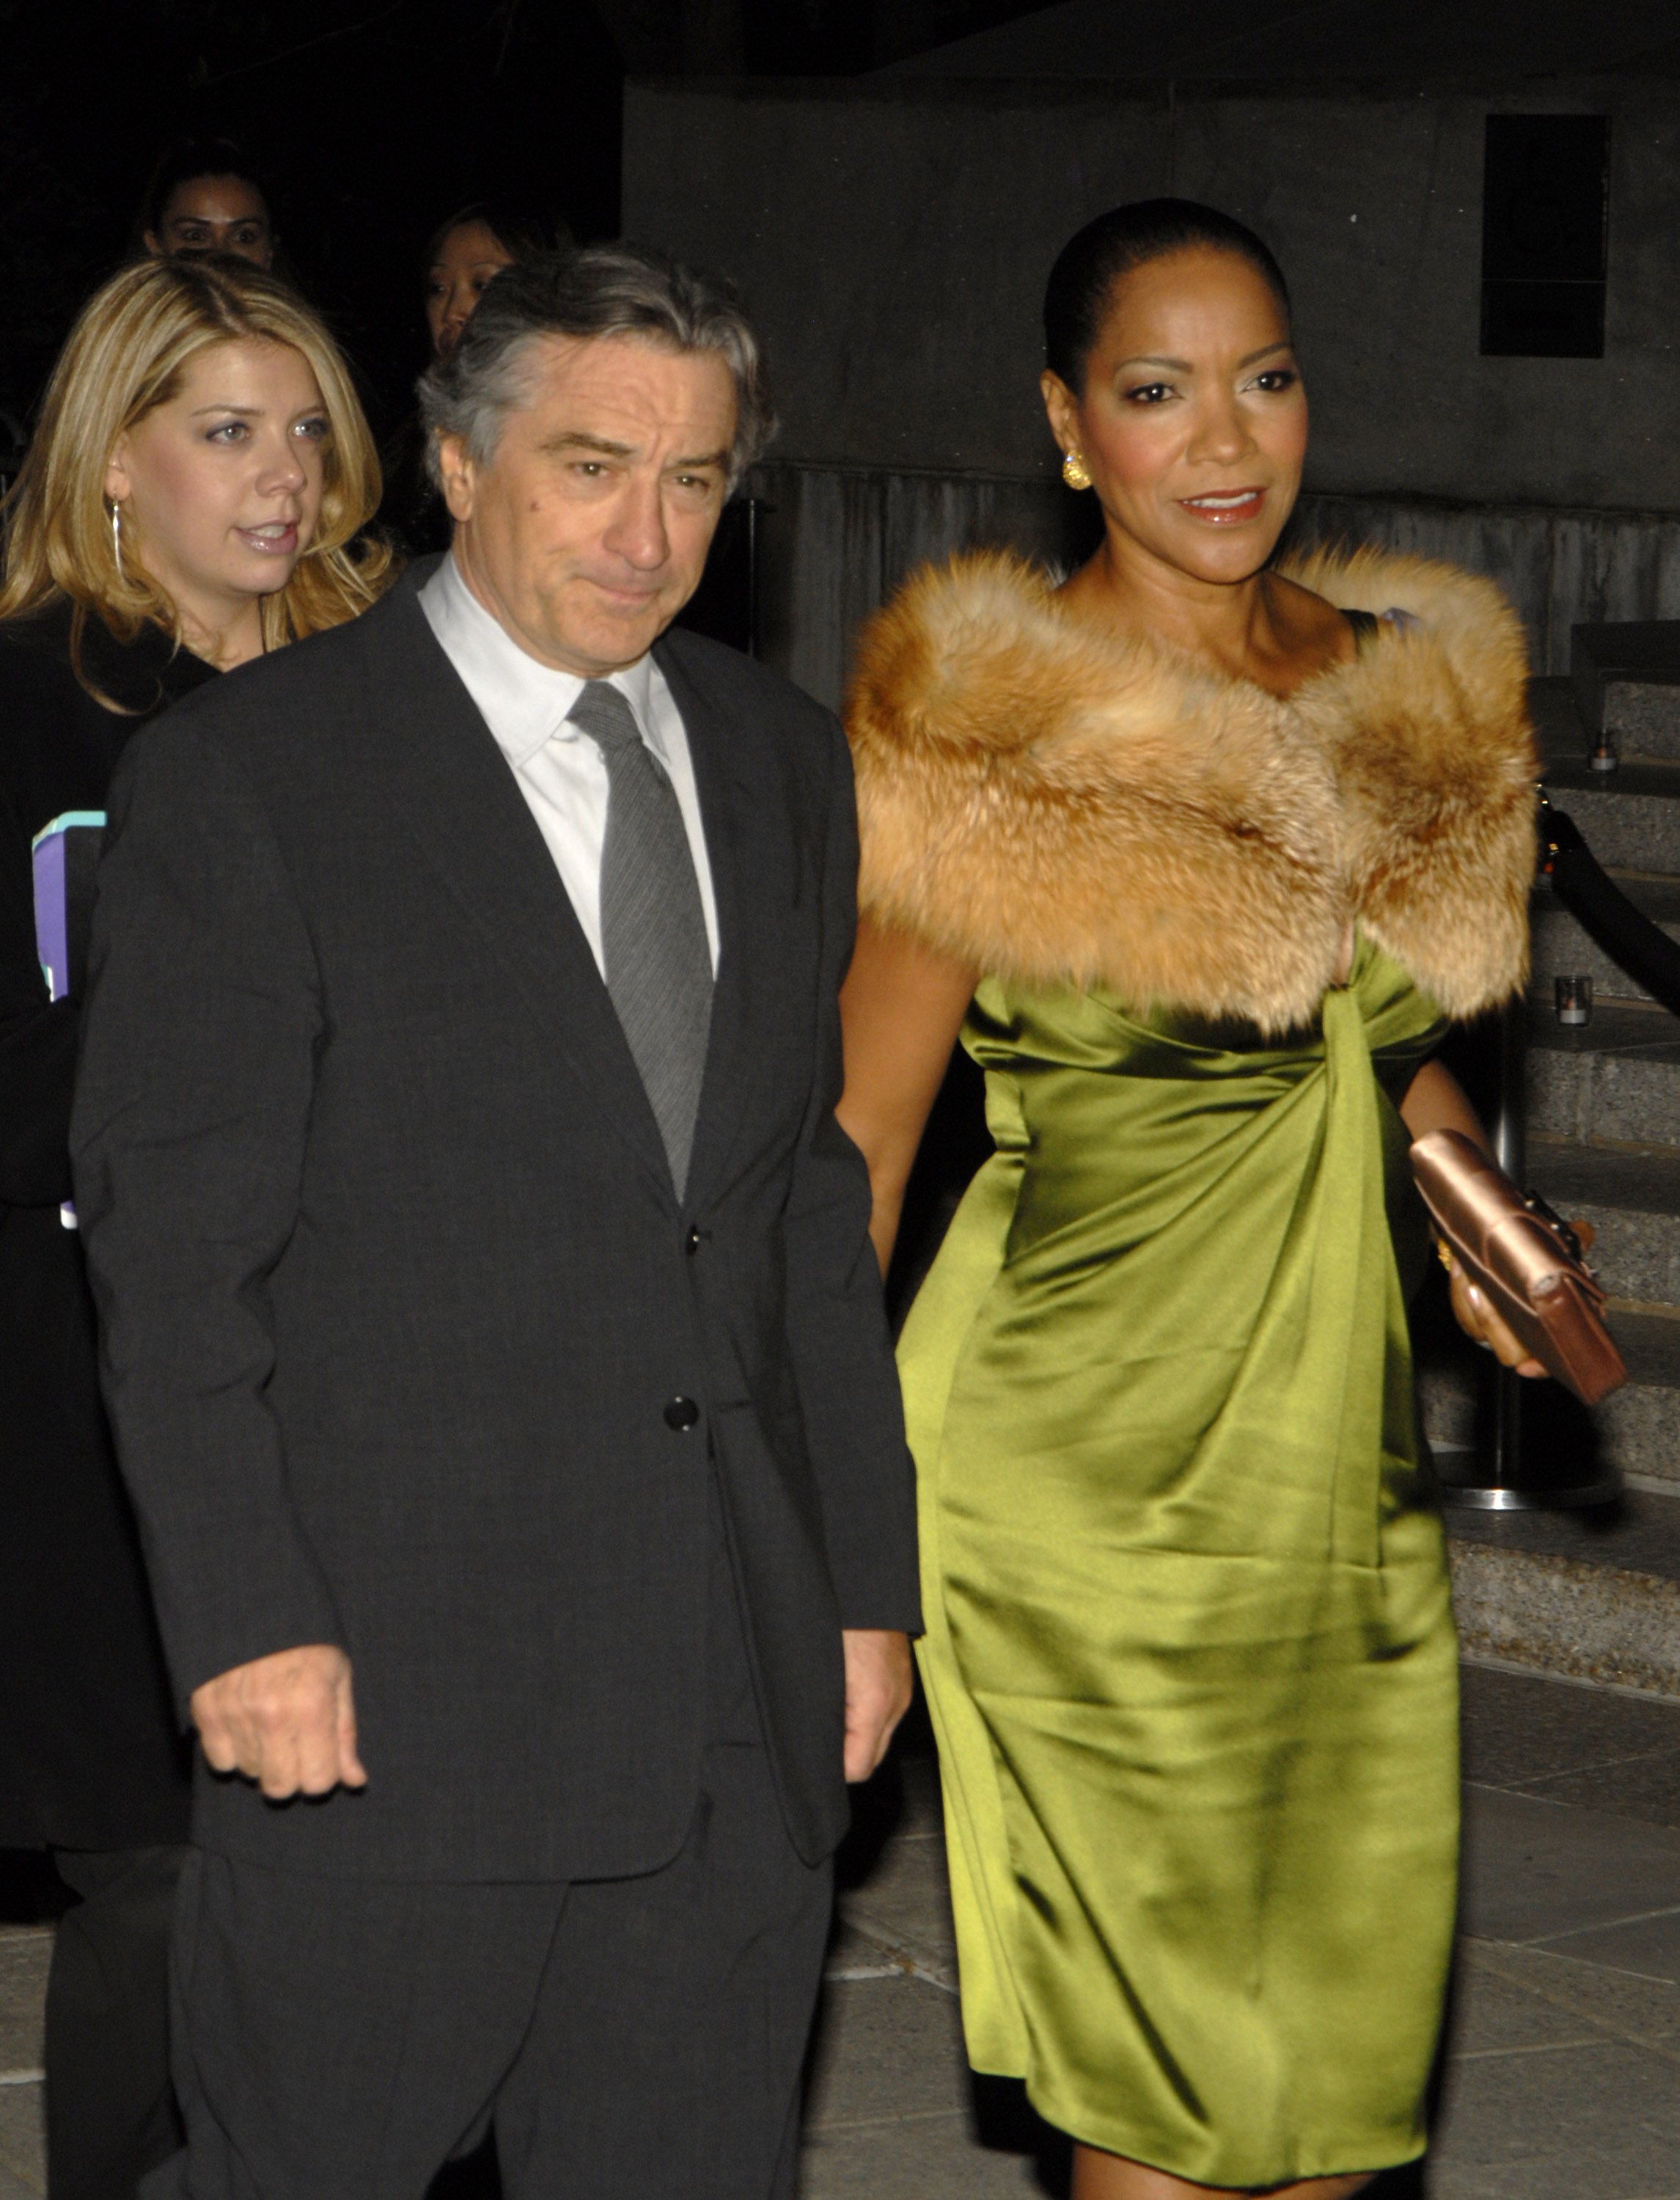 Robert De Niro and Grace Hightower during 5th Annual Tribeca Film Festival - Vanity Fair Party - Arrivals at New York State Supreme Court in New York City, New York | Source: Getty Images